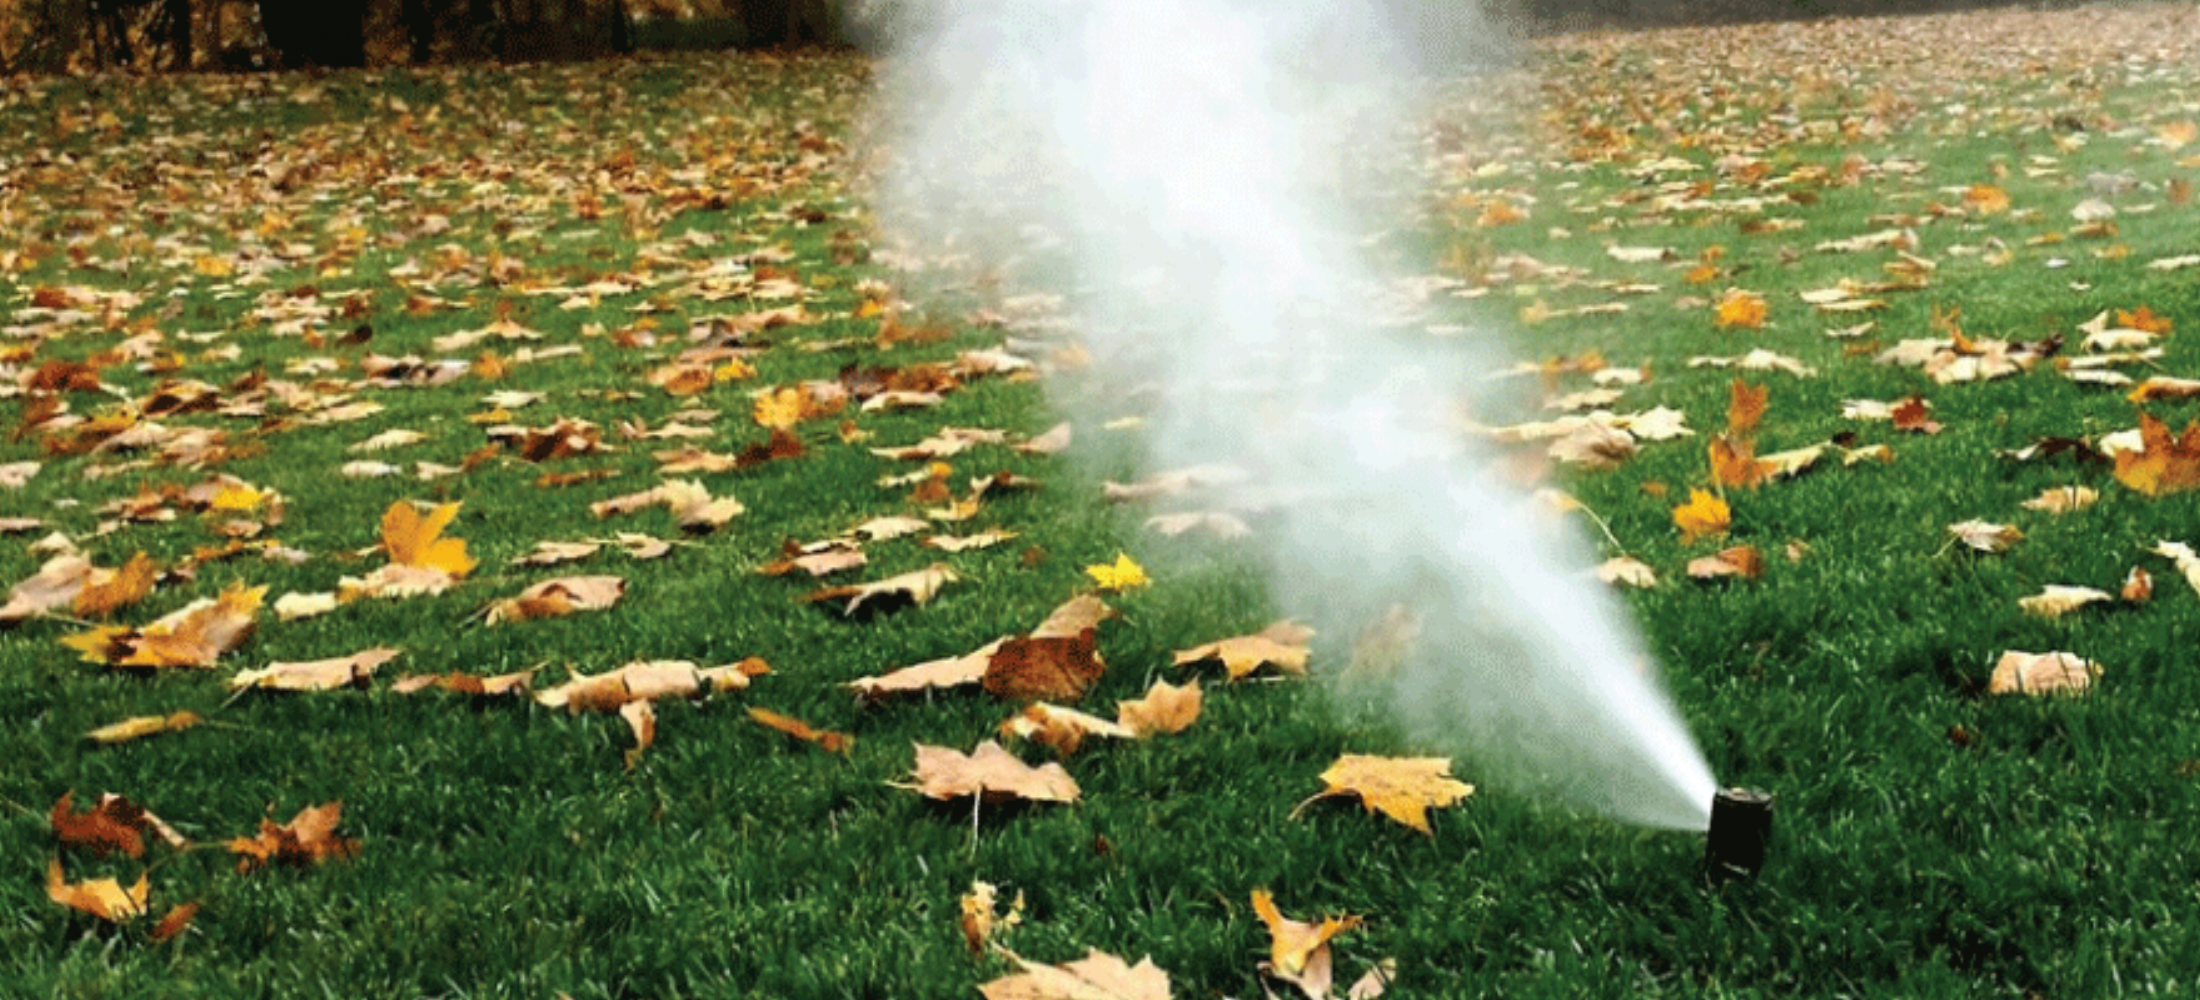 Winterize your irrigation system.